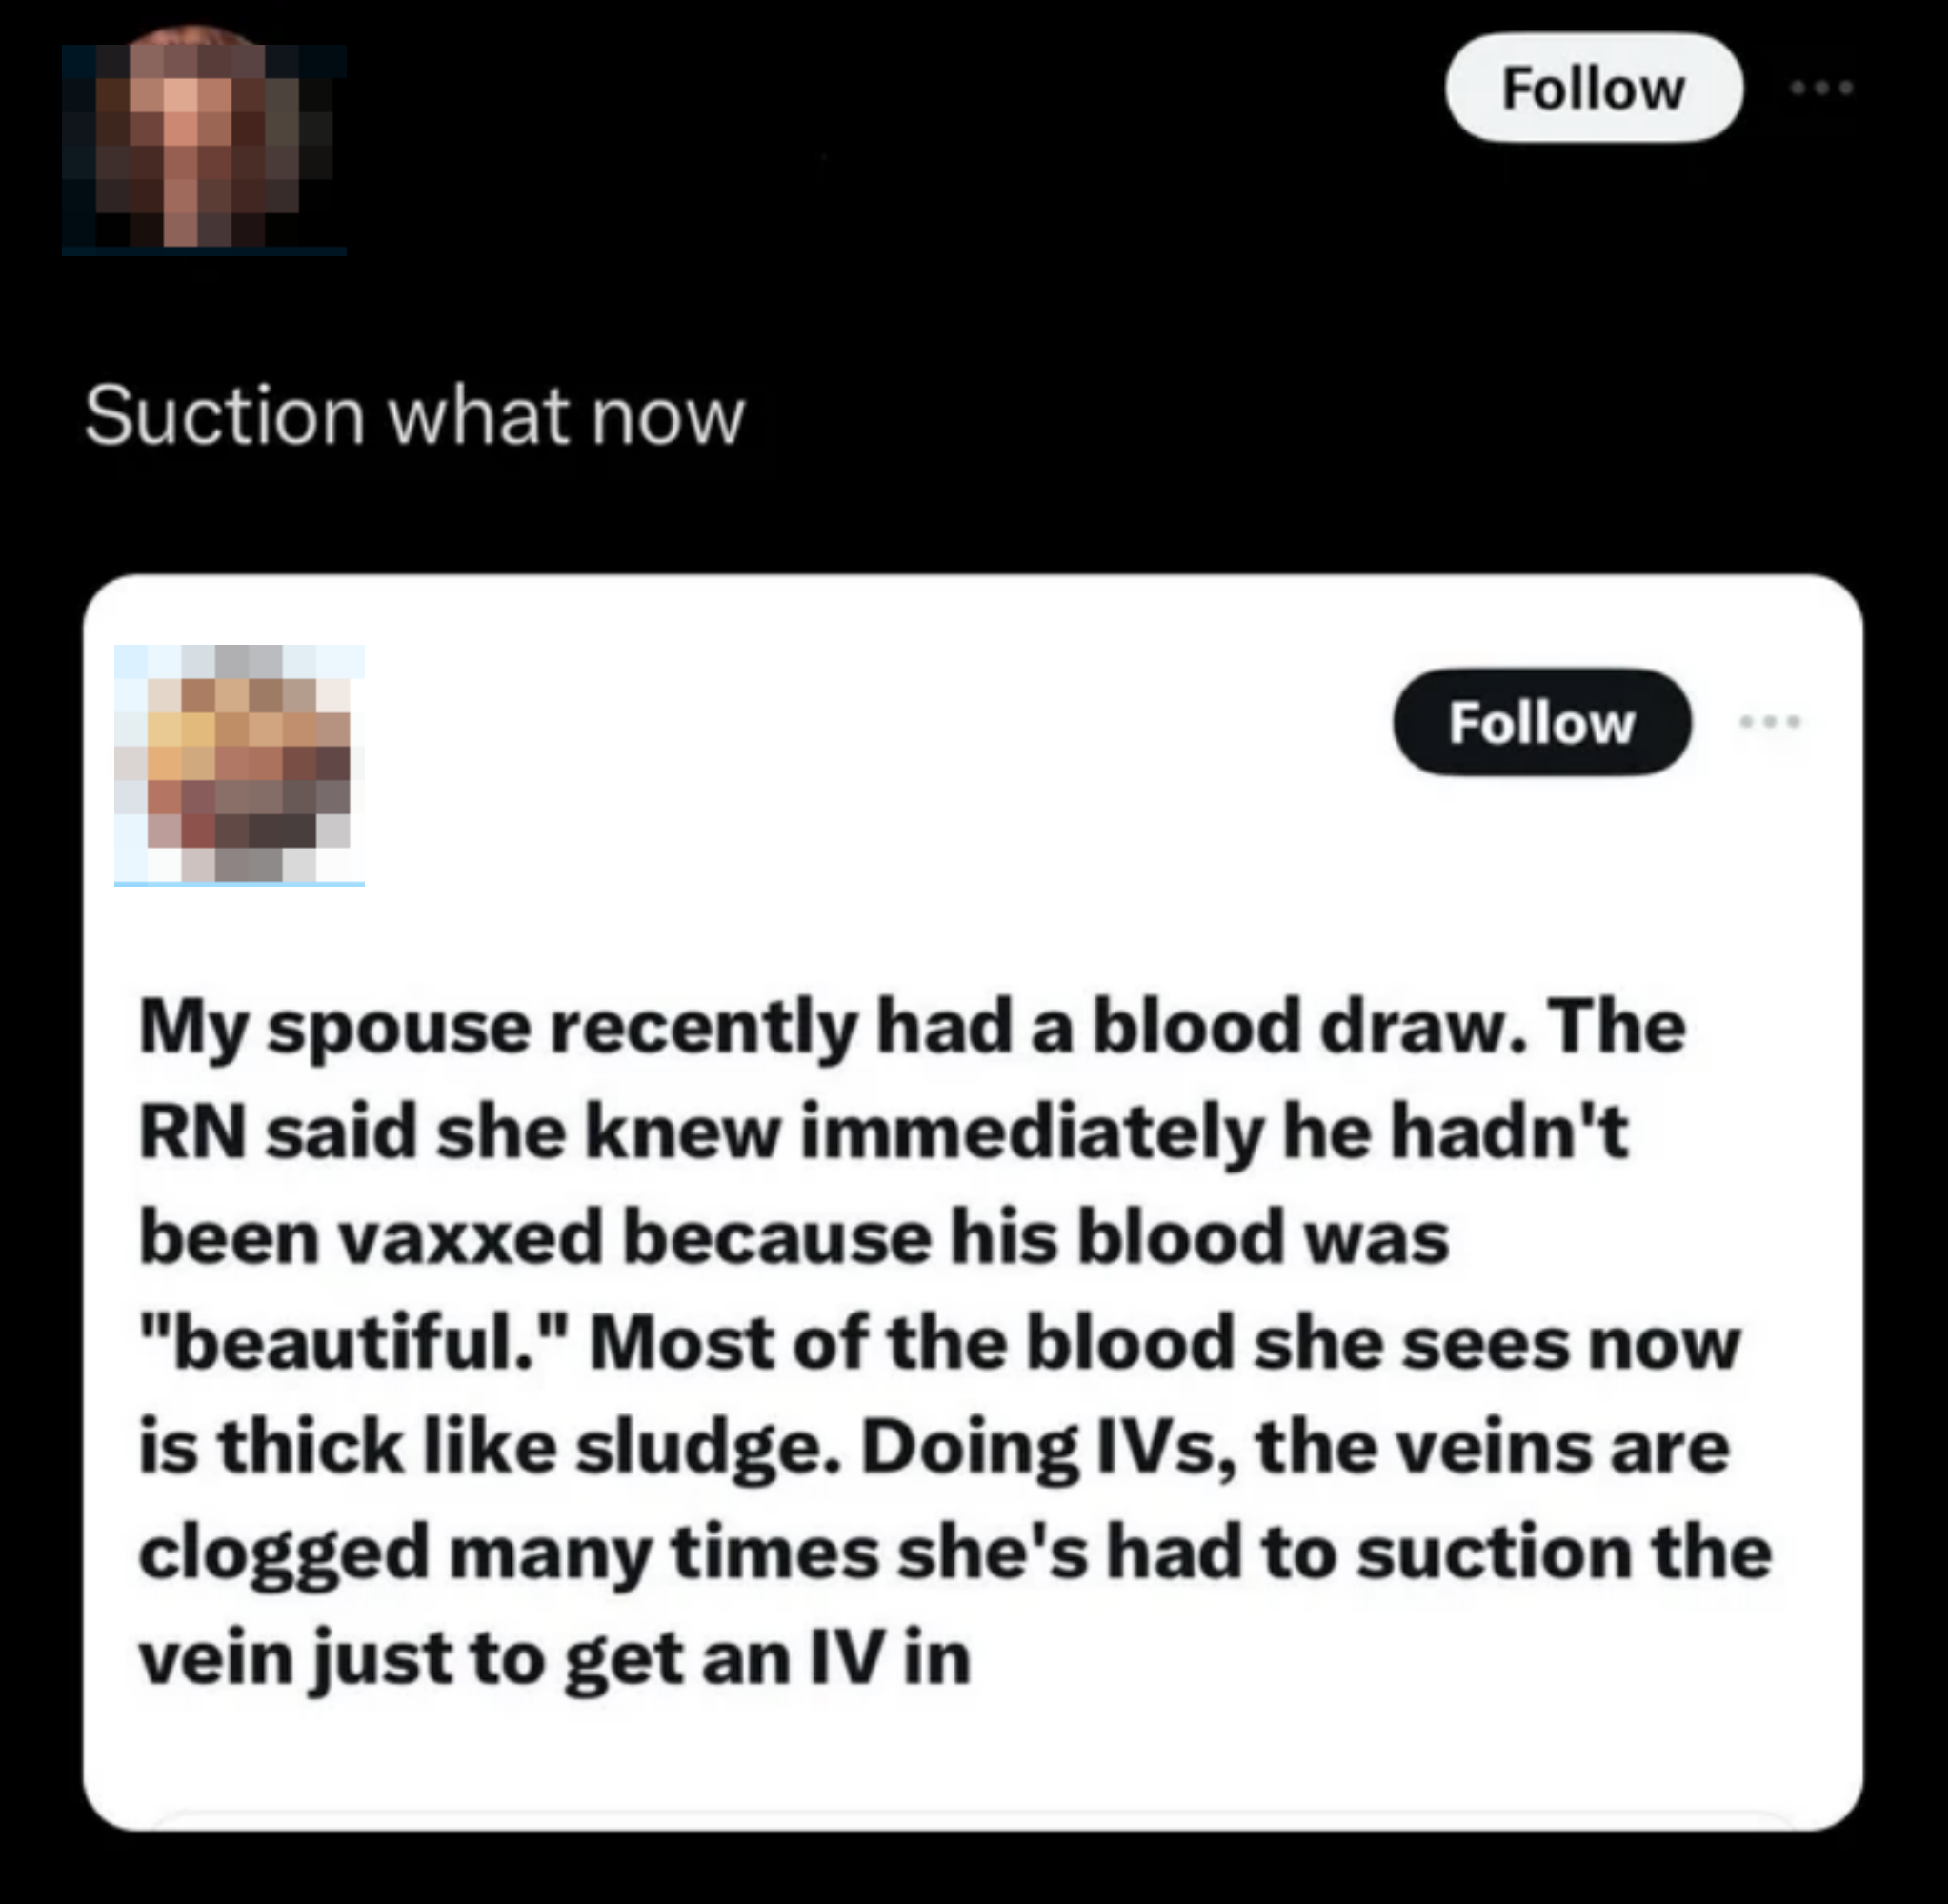 &quot;My spouse recently had a blood draw.&quot;